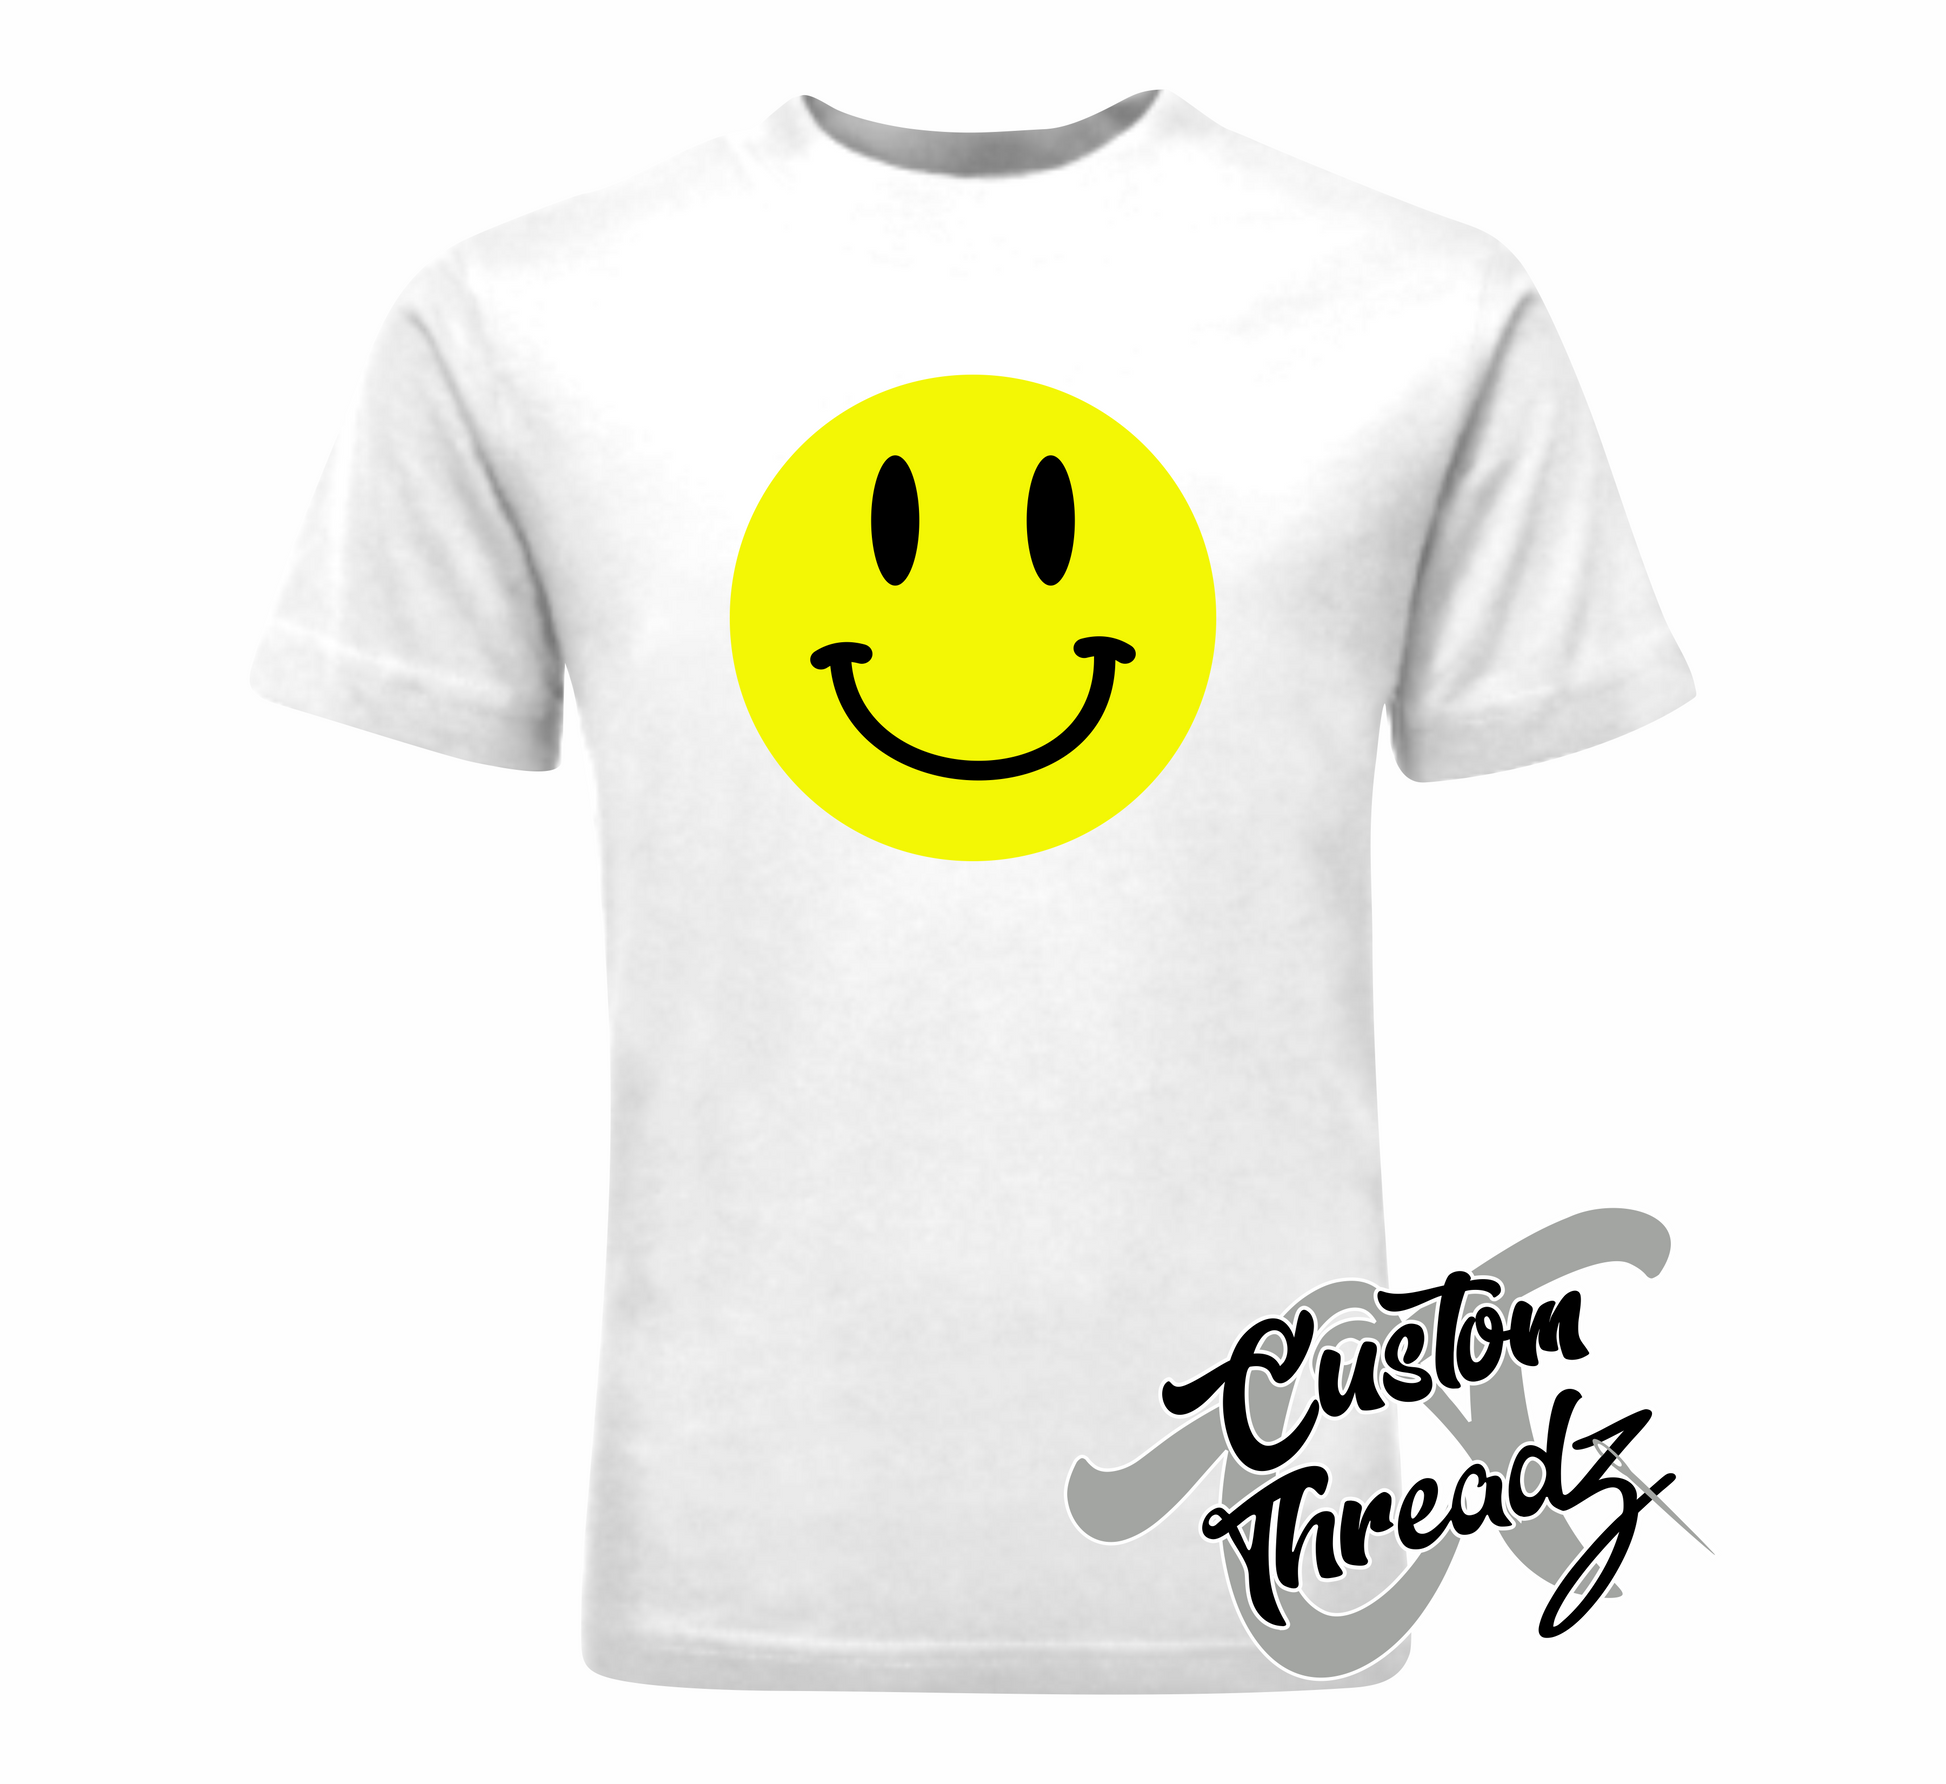 white tee with smiley face DTG printed design